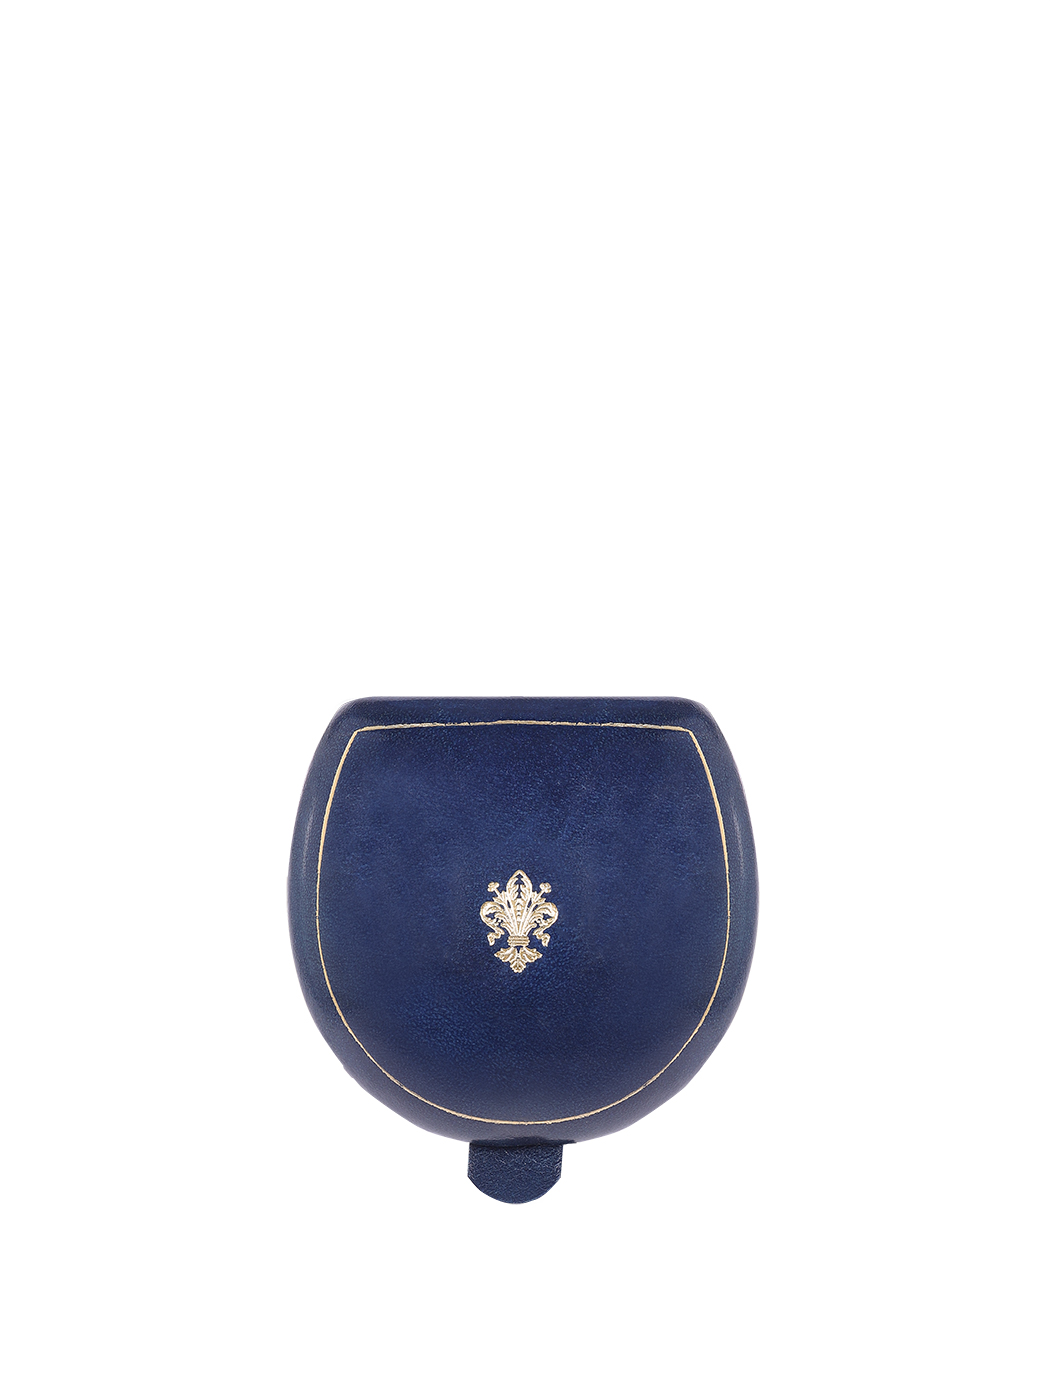 Florentine Lily Tacco Coin Holder Blue